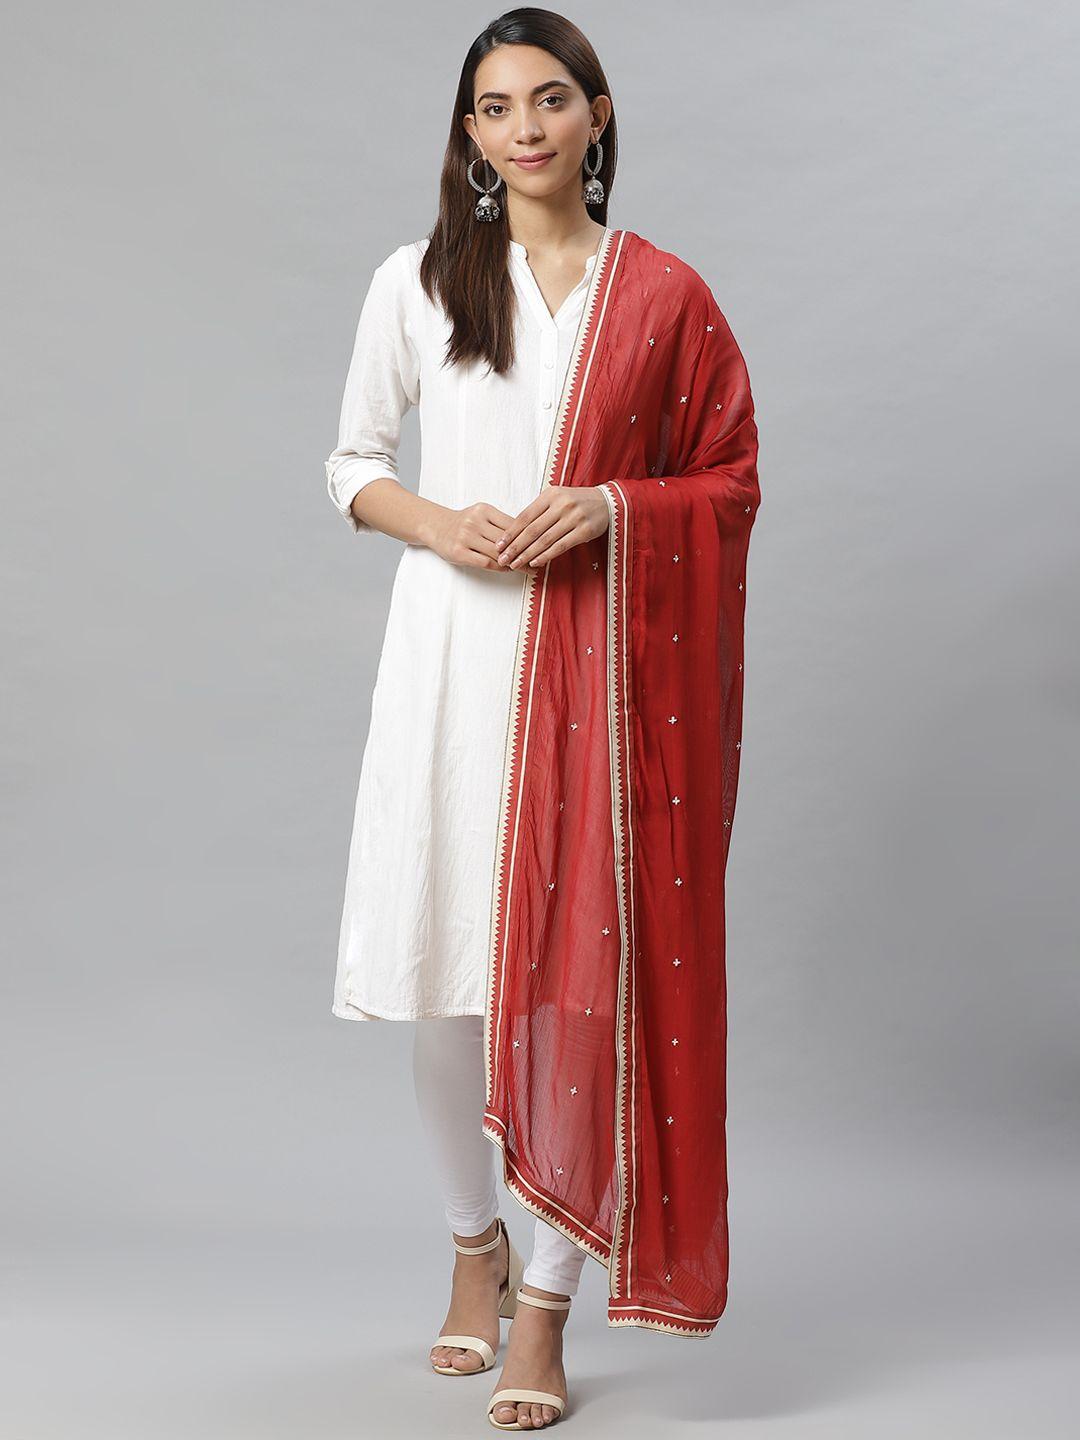 w rust red & white embroidered dupatta